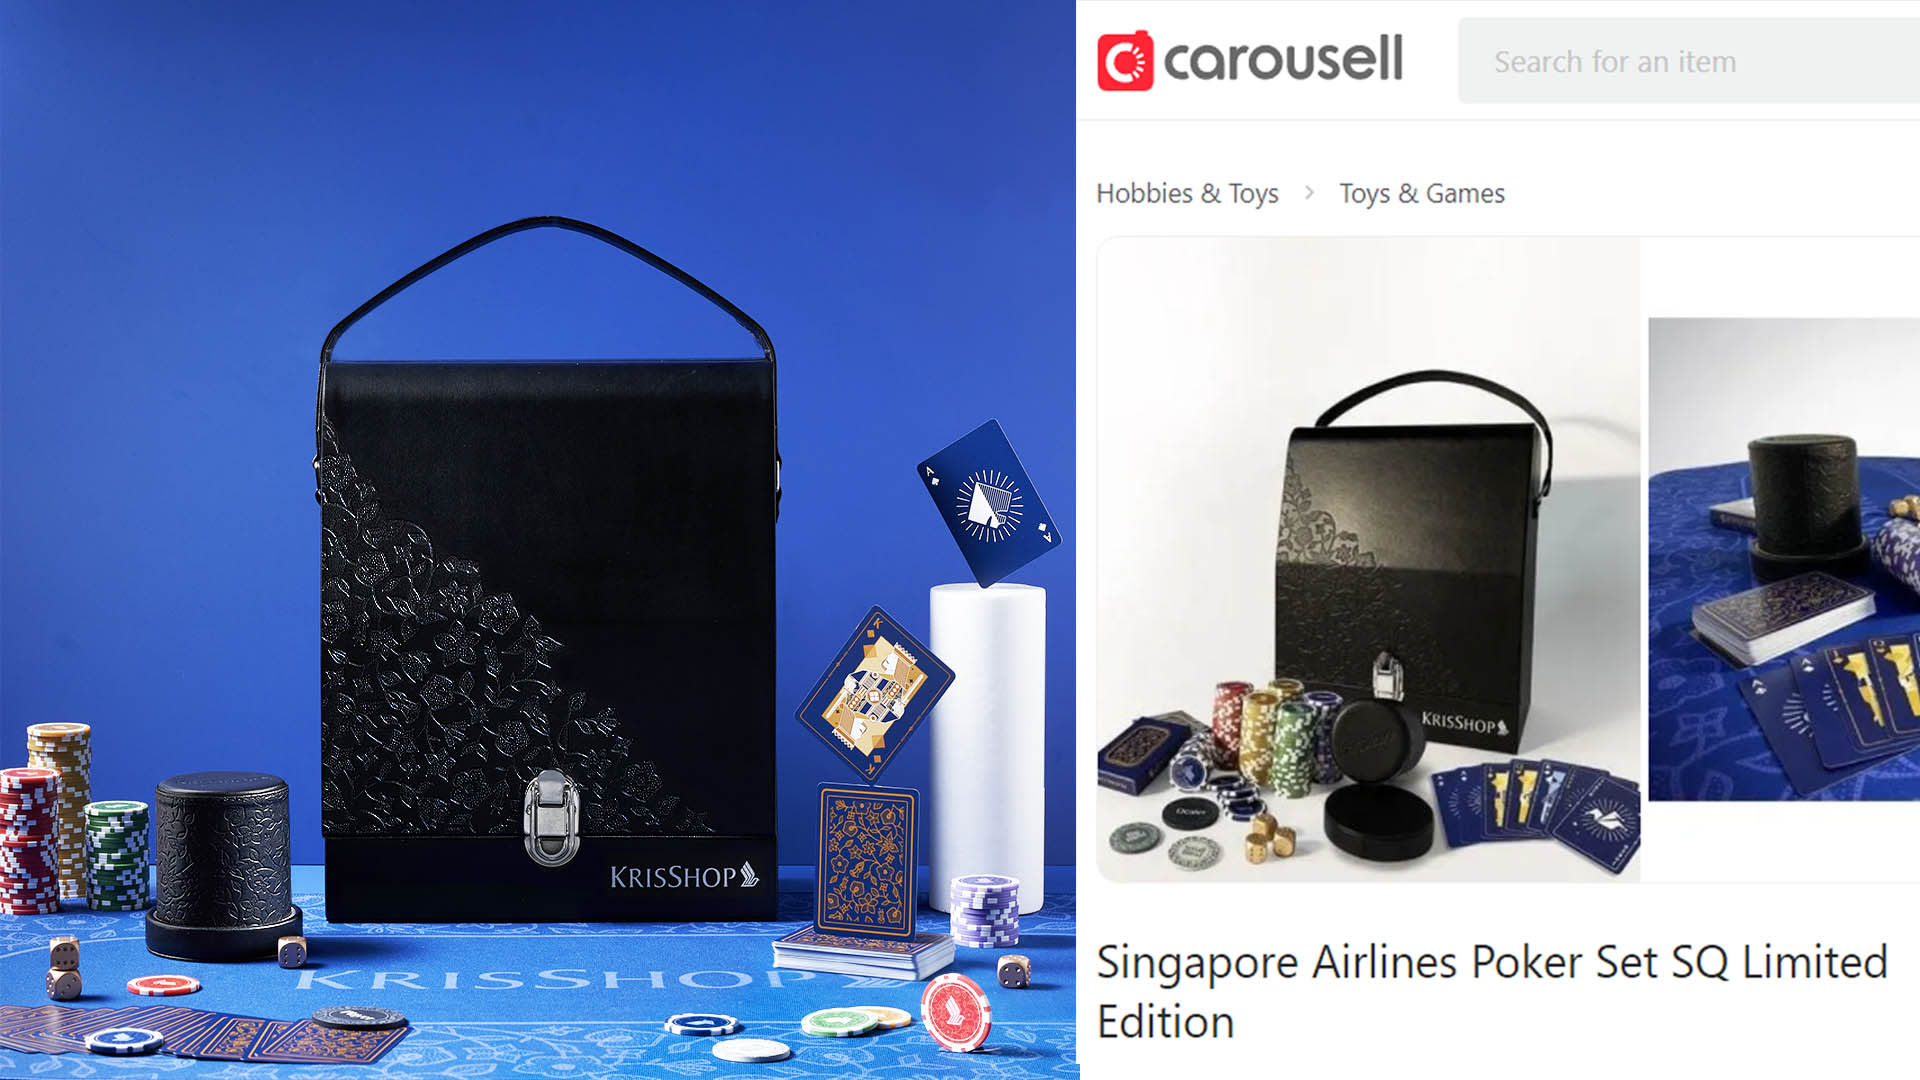 SIA Batik-Printed Poker Set Sold Out In 1 Day; But Available On Carousell For... A Lot More Money